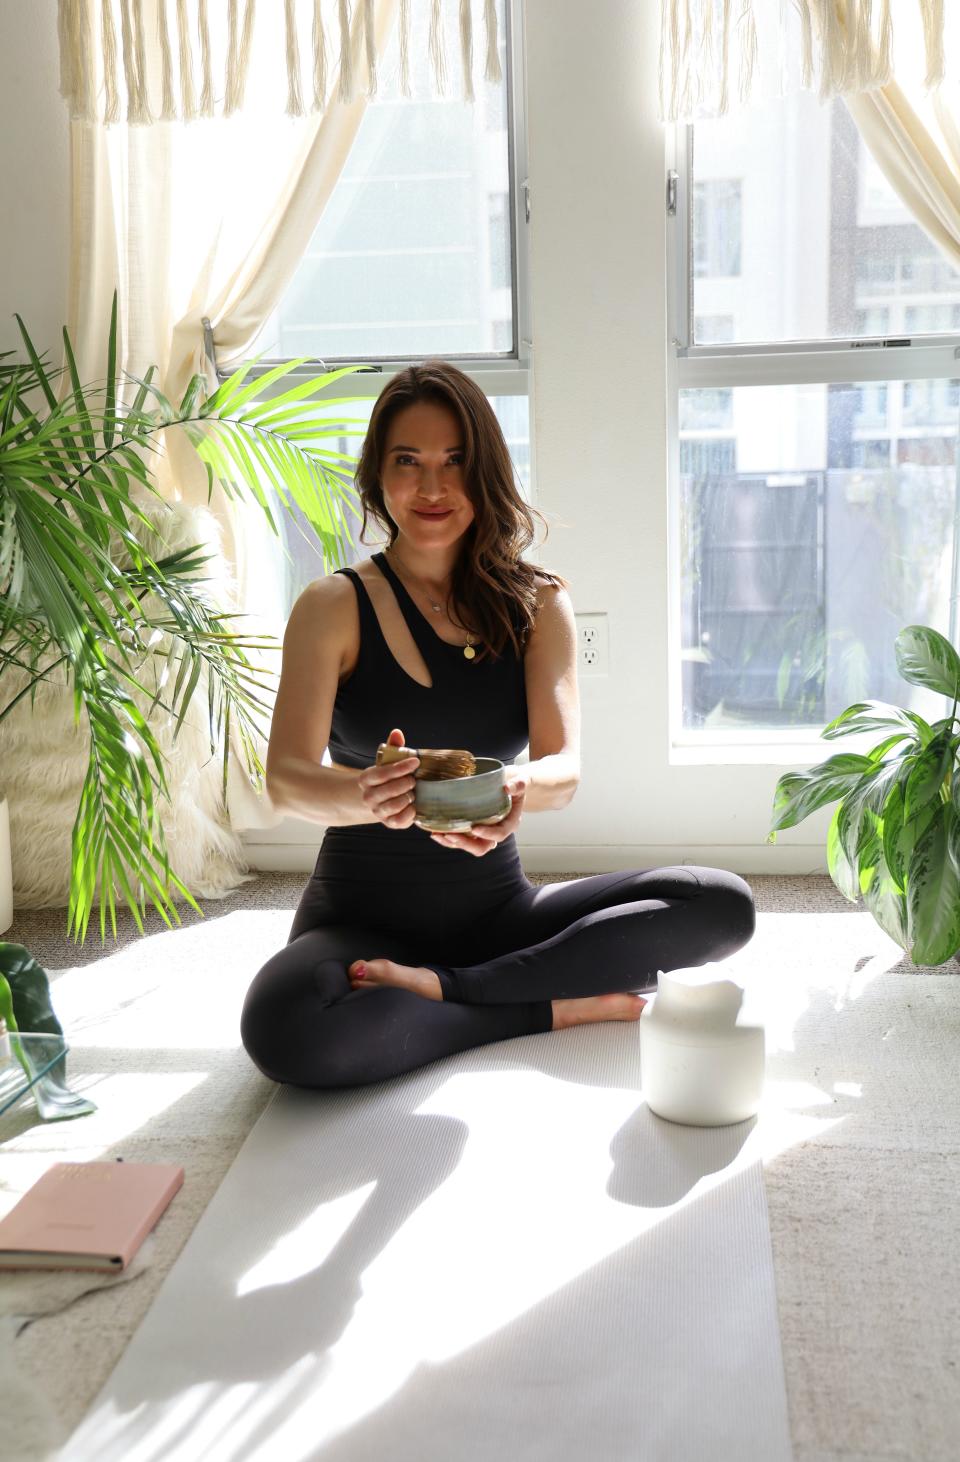 Candice Kumai is a chef and wellness influencer who has her own matcha brand.